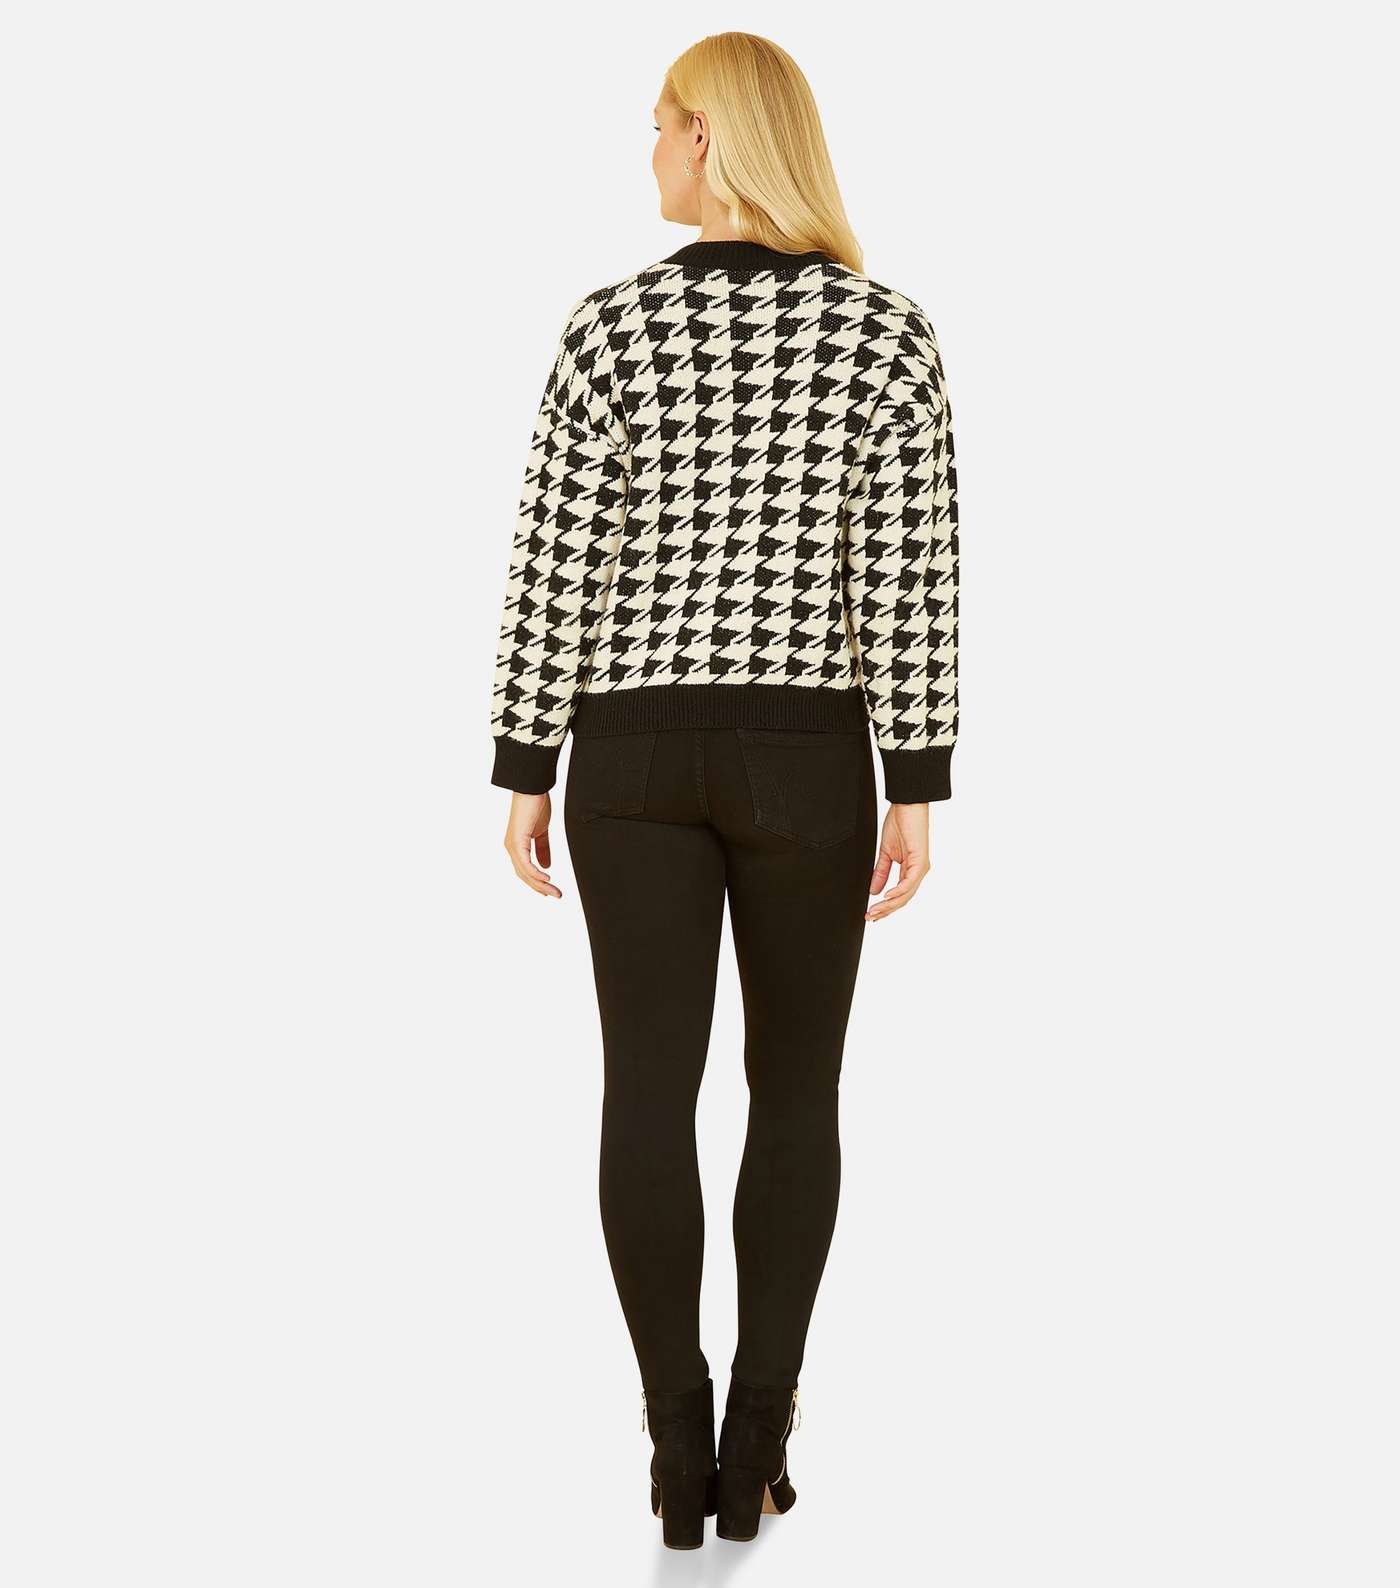 Yumi Black Dogtooth Knit Button Front Cardigan Image 3